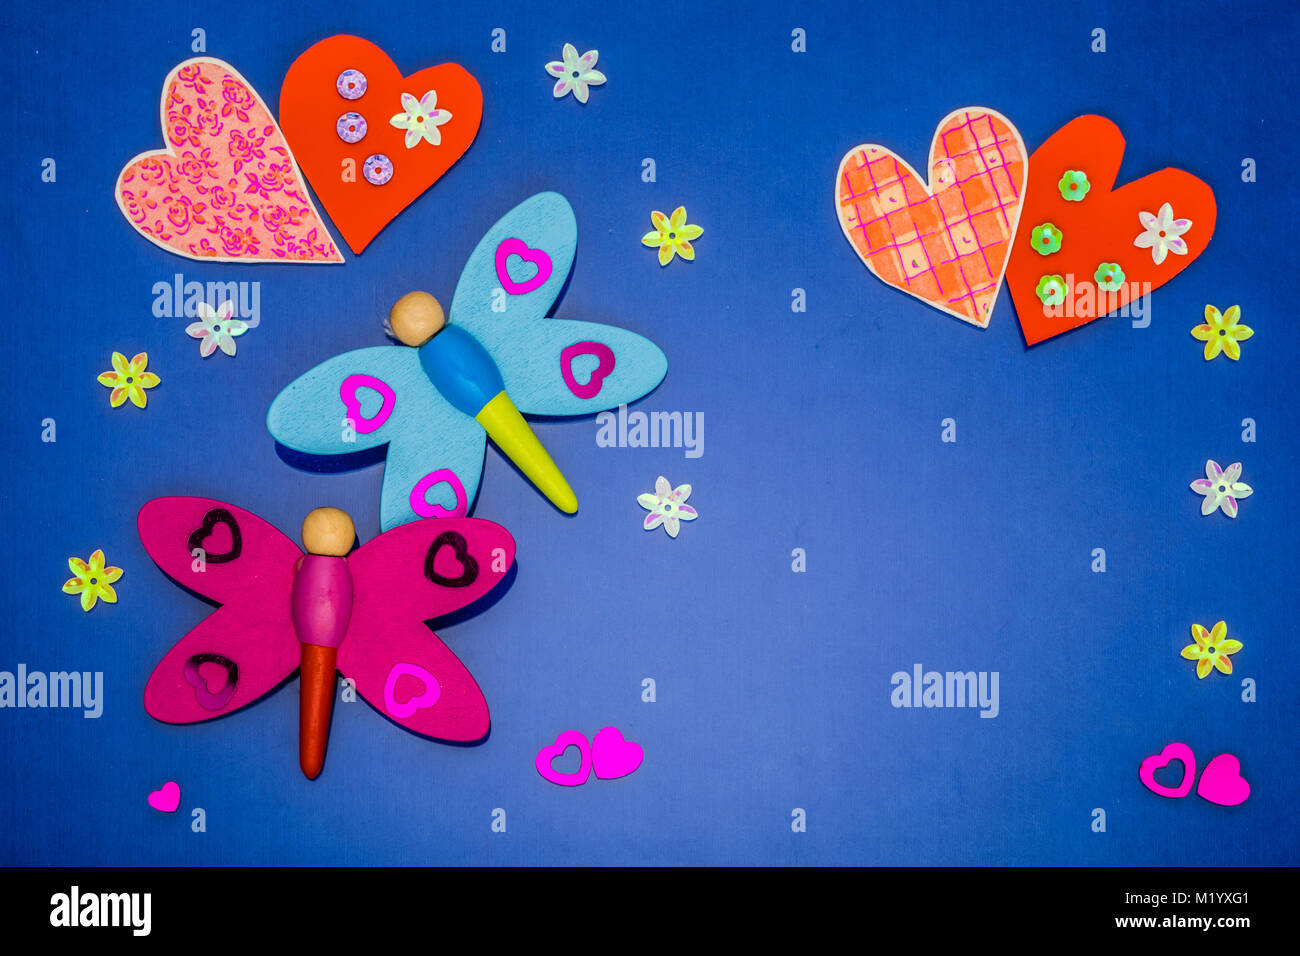 Greeting card with hearts and dragonflies on colored background Stock Photo